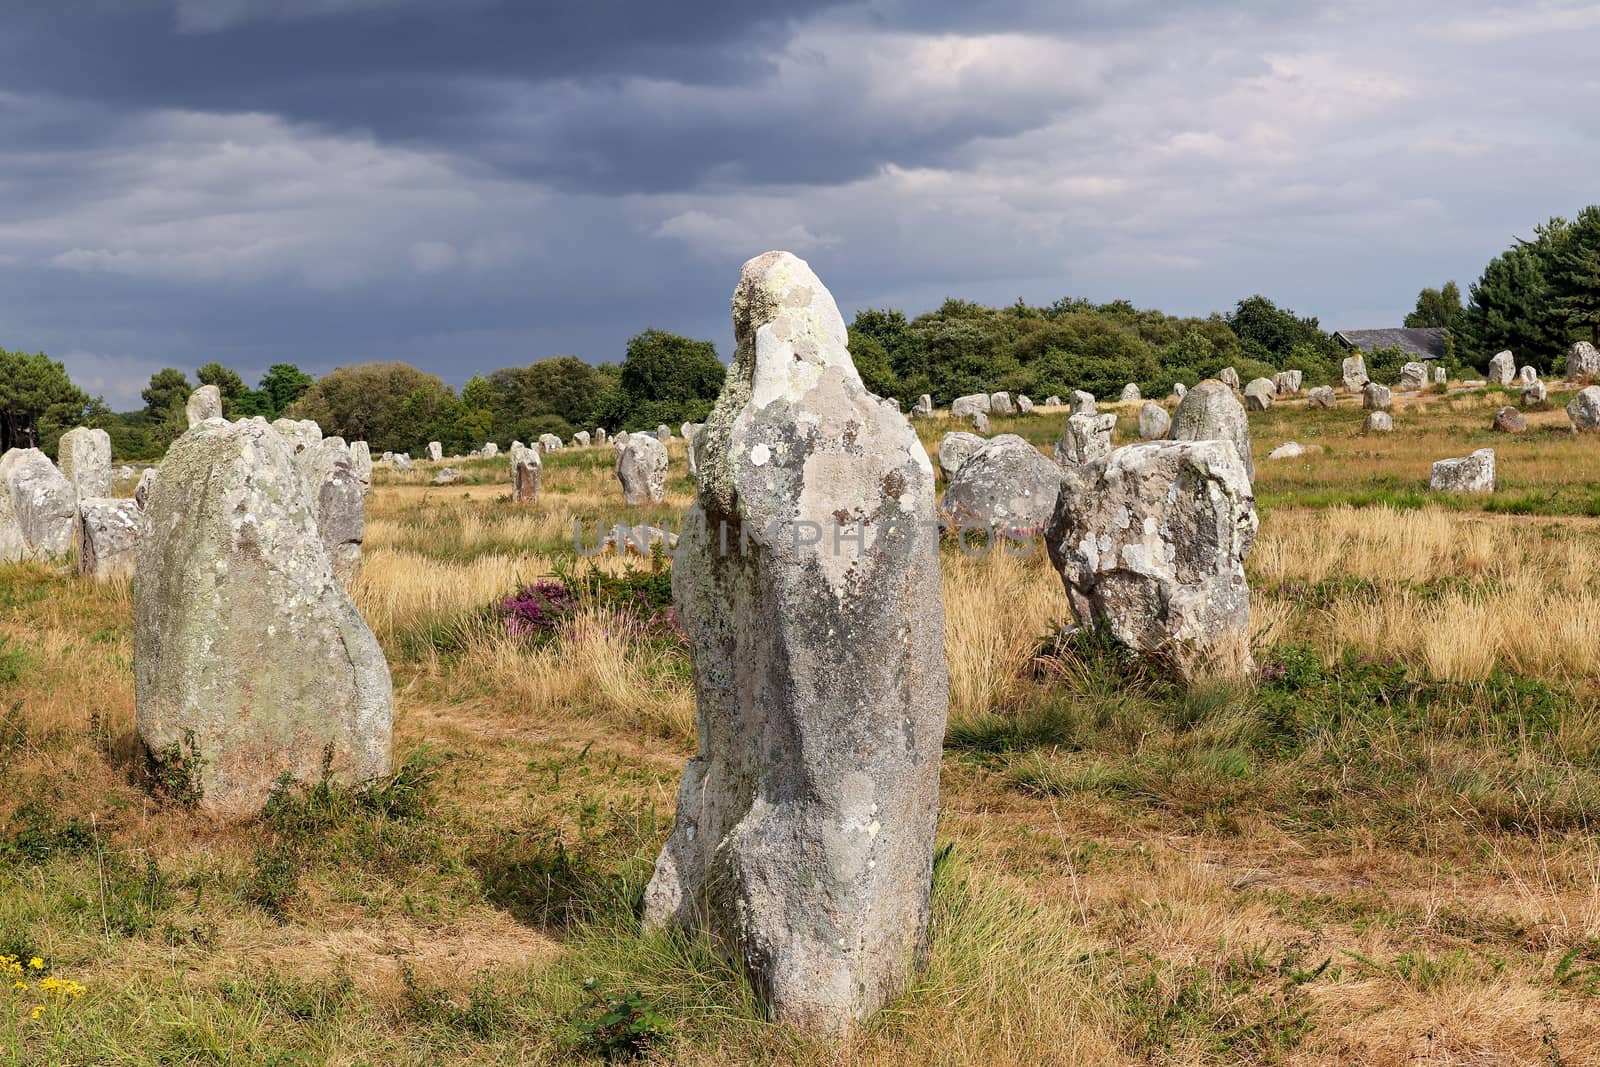 Alignements du Menec  - lines of Menhirs - standing stones - the largest megalithic site in the world, Carnac, Brittany, France
